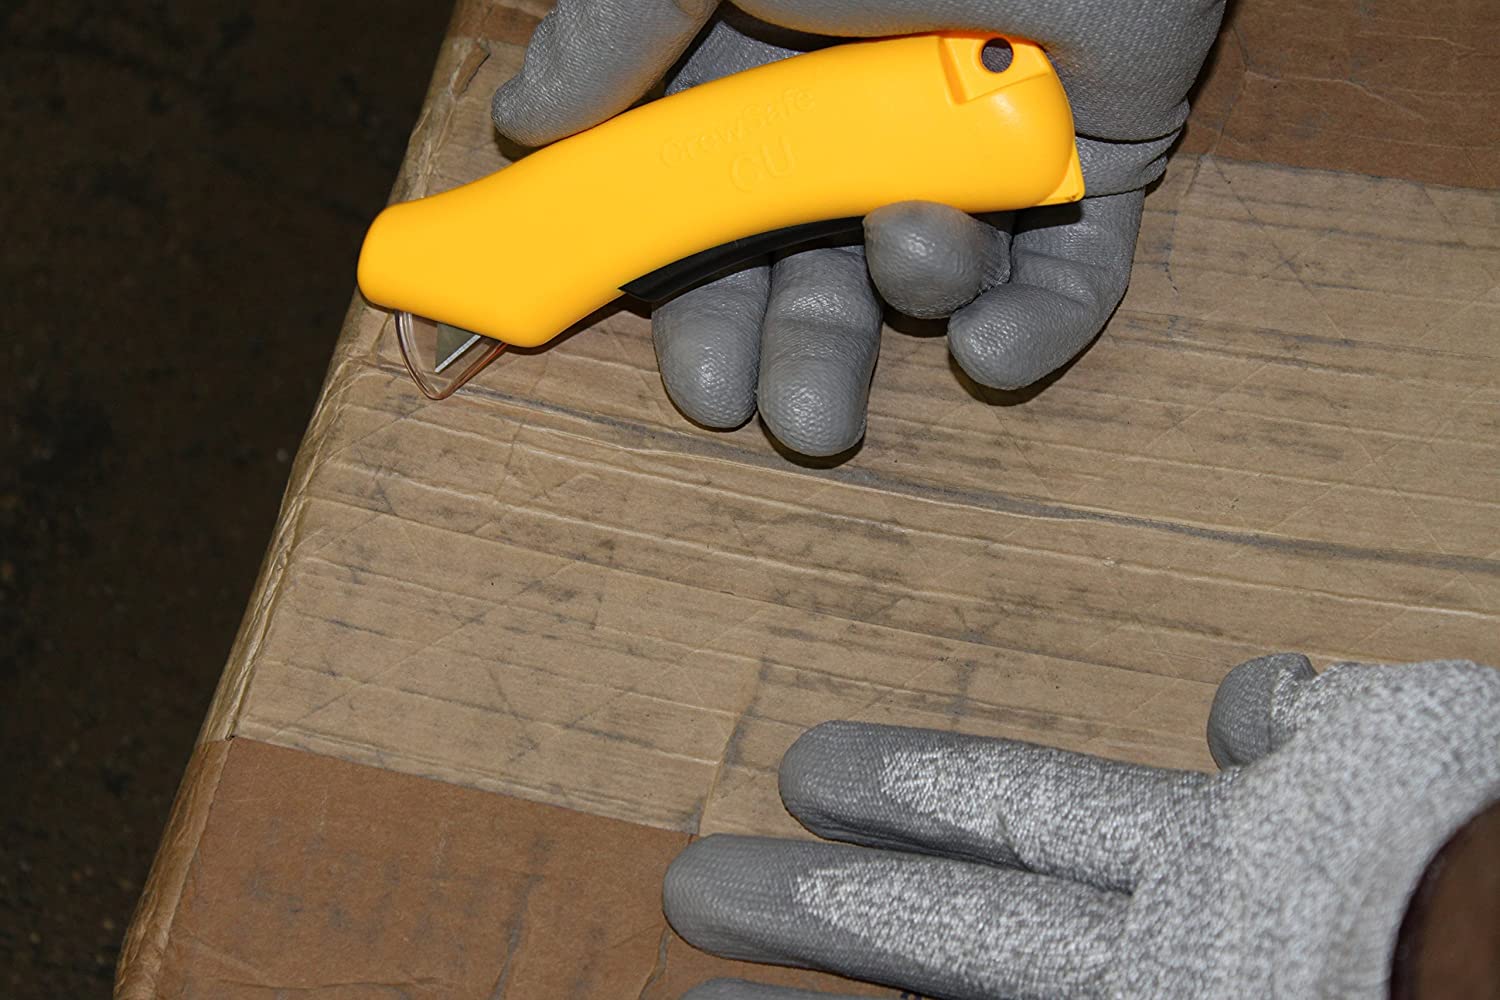 safety box cutters